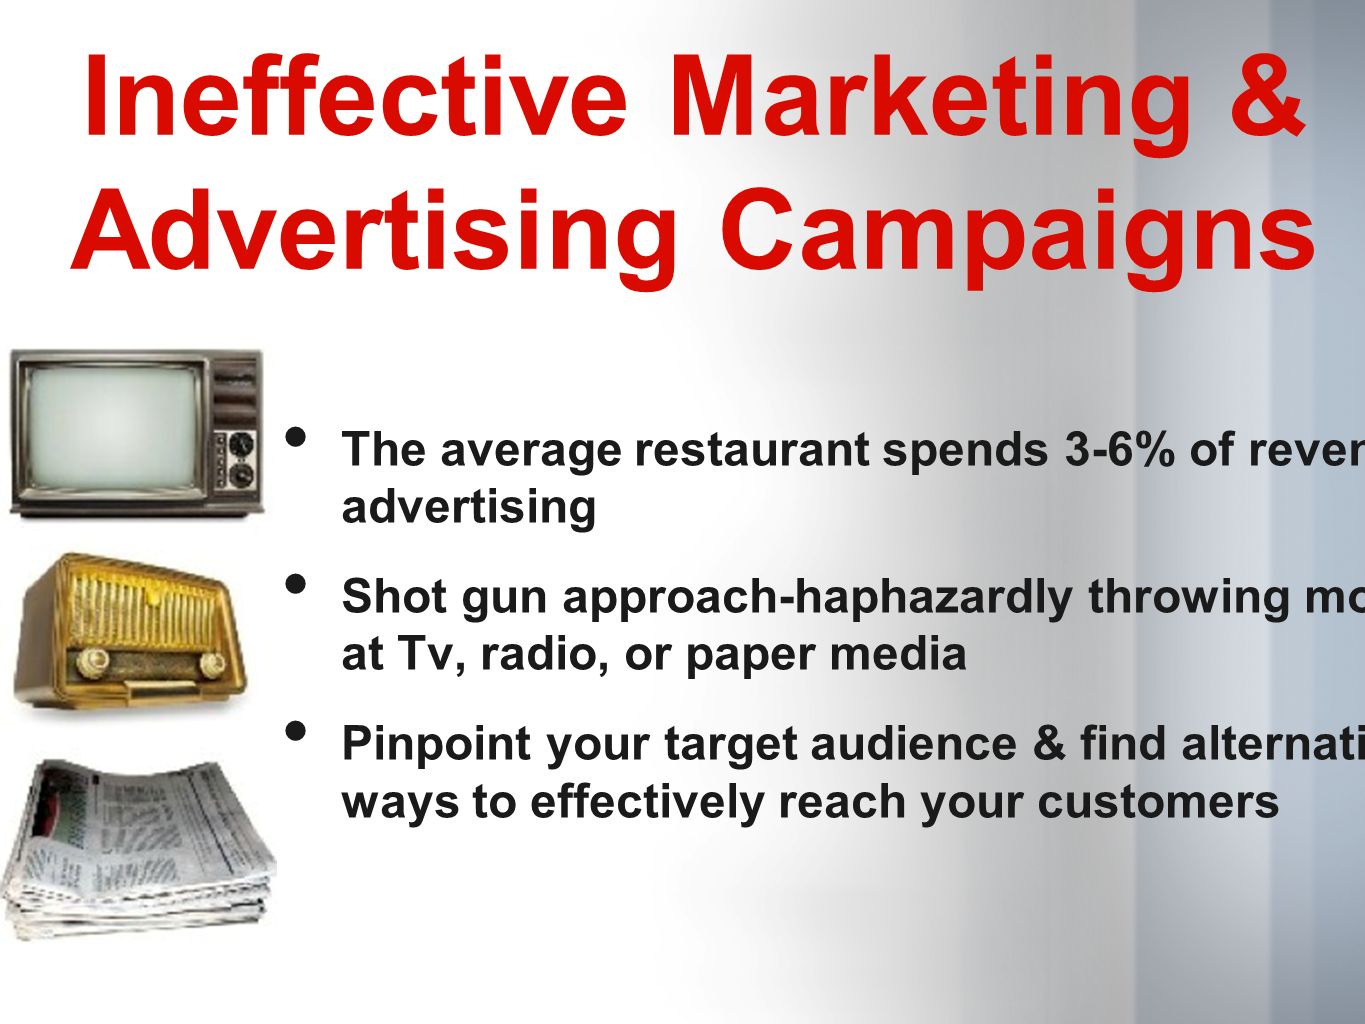 Ineffective Marketing & Advertising Campaigns The average restaurant spends 3-6% of revenues advertising Shot gun approach-haphazardly throwing money at Tv, radio, or paper media Pinpoint your target audience & find alternative ways to effectively reach your customers